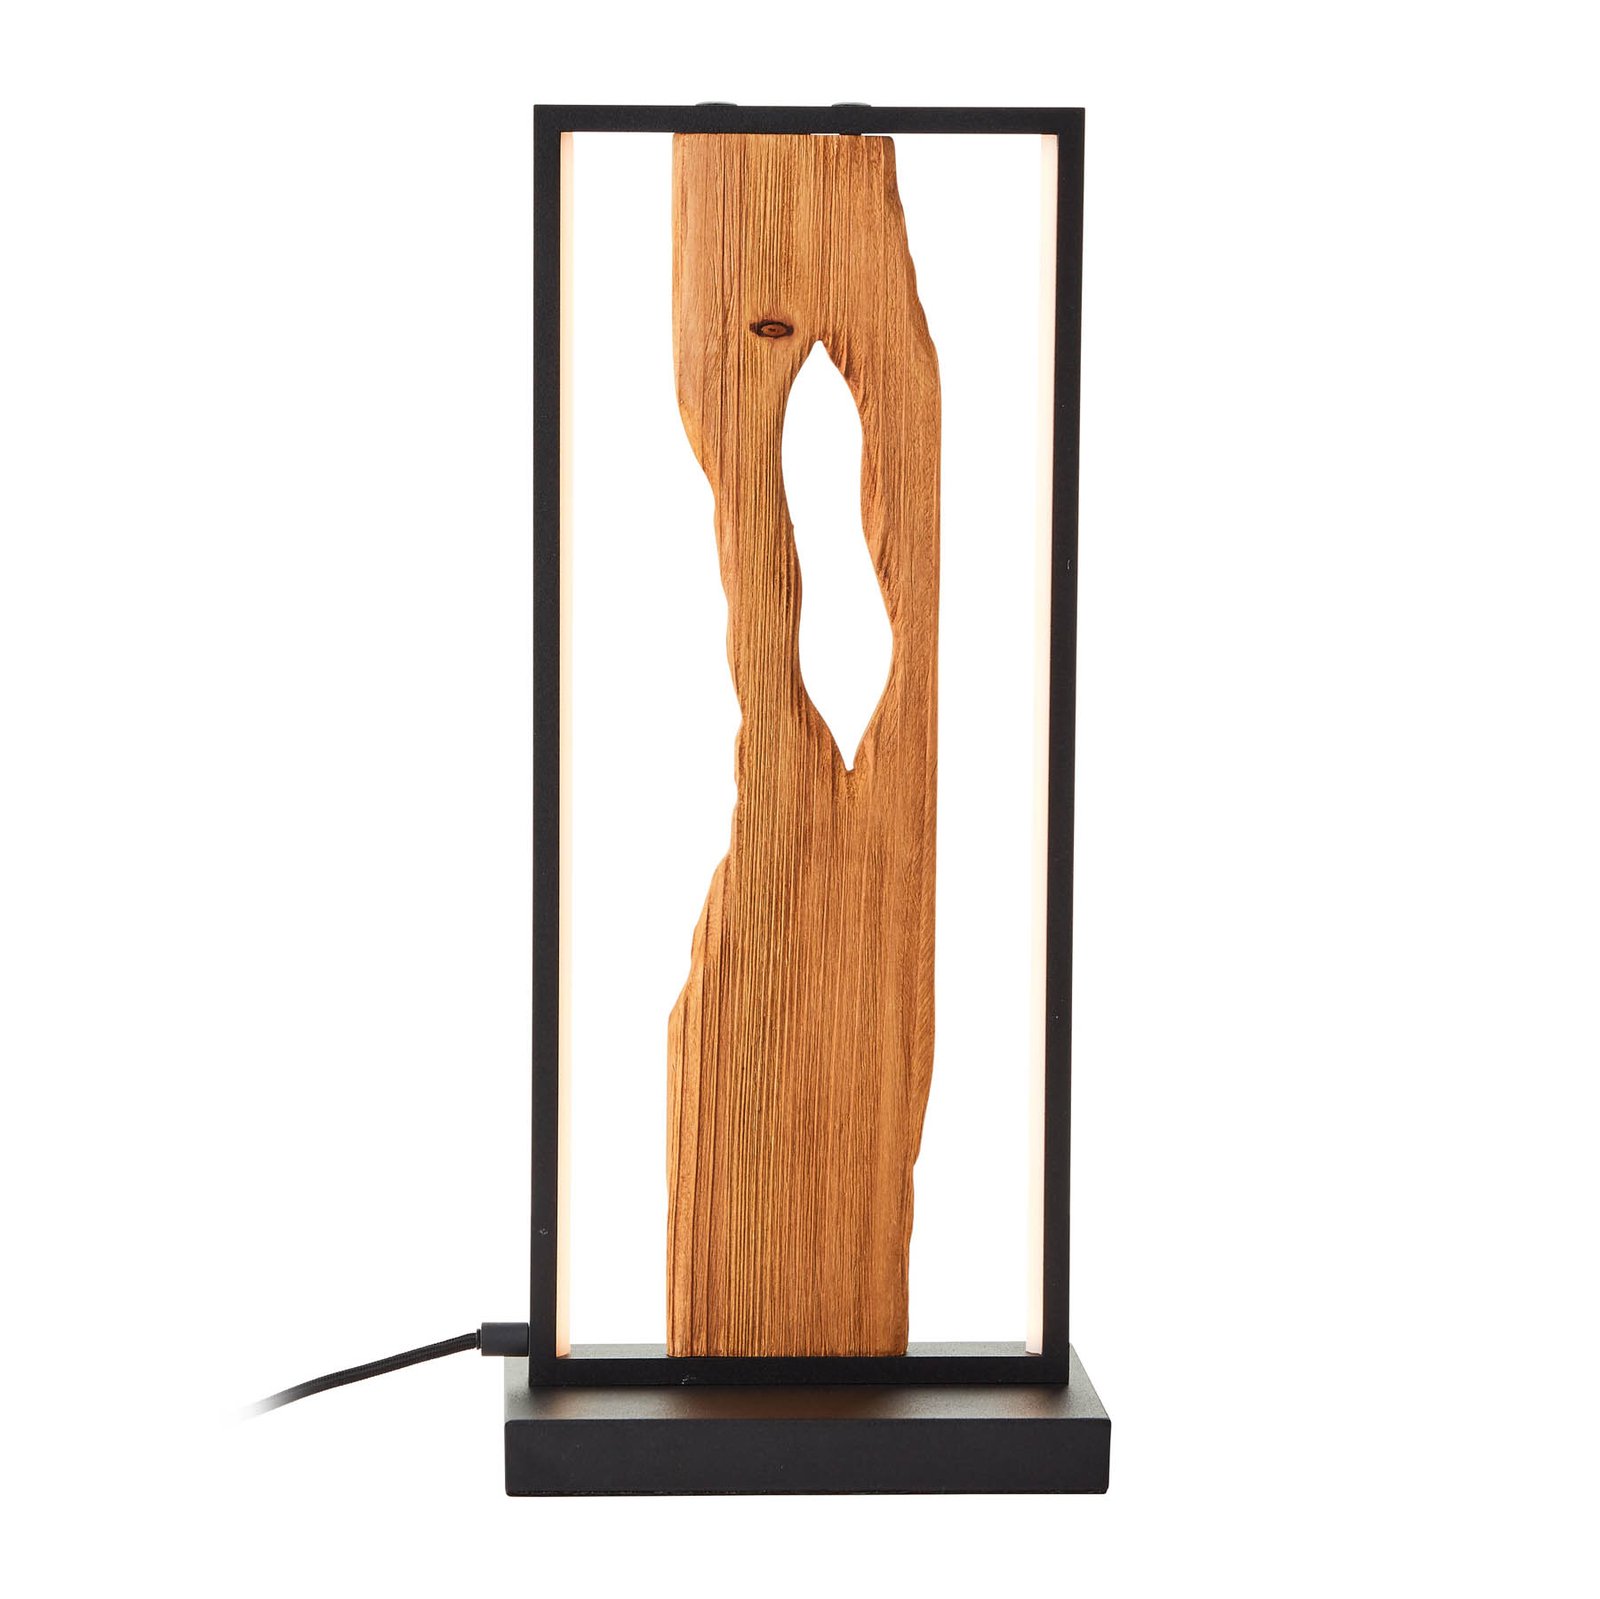 Chaumont LED table lamp made of wood